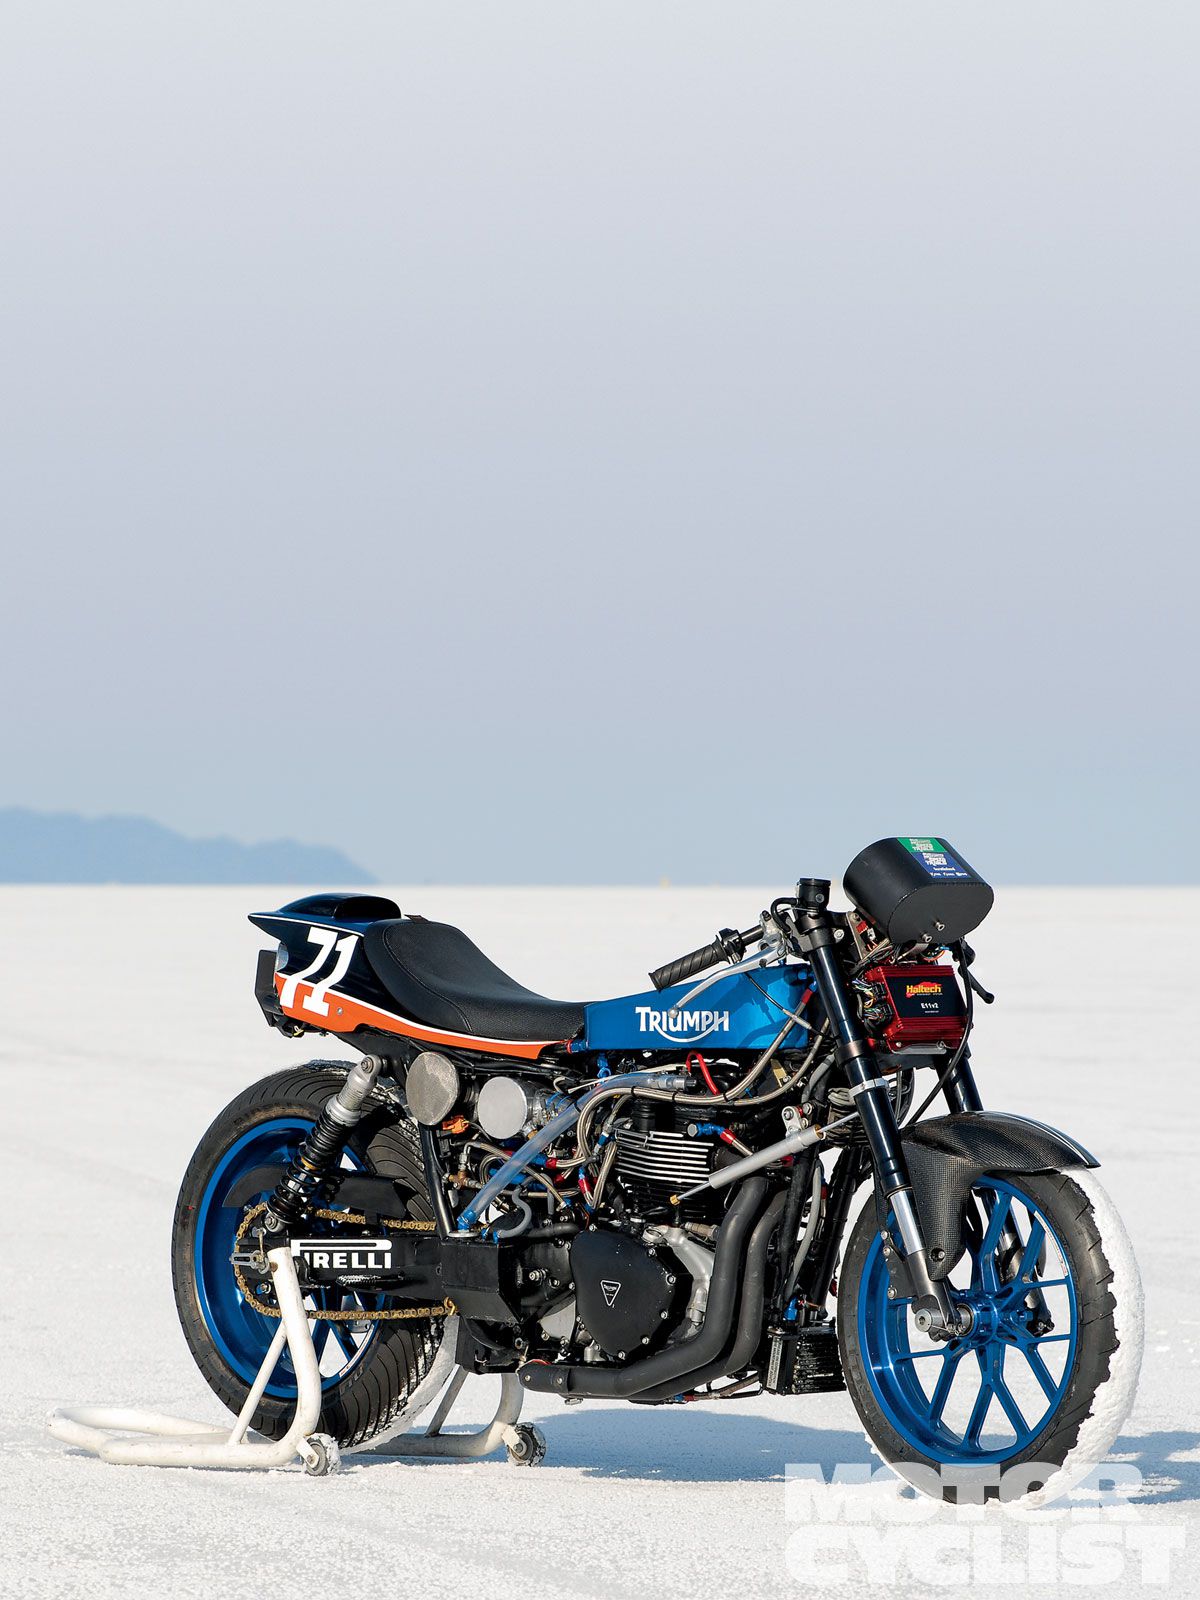 Boosted Bonnie What It Takes To Build A 230 Horsepower Twin Motorcyclist